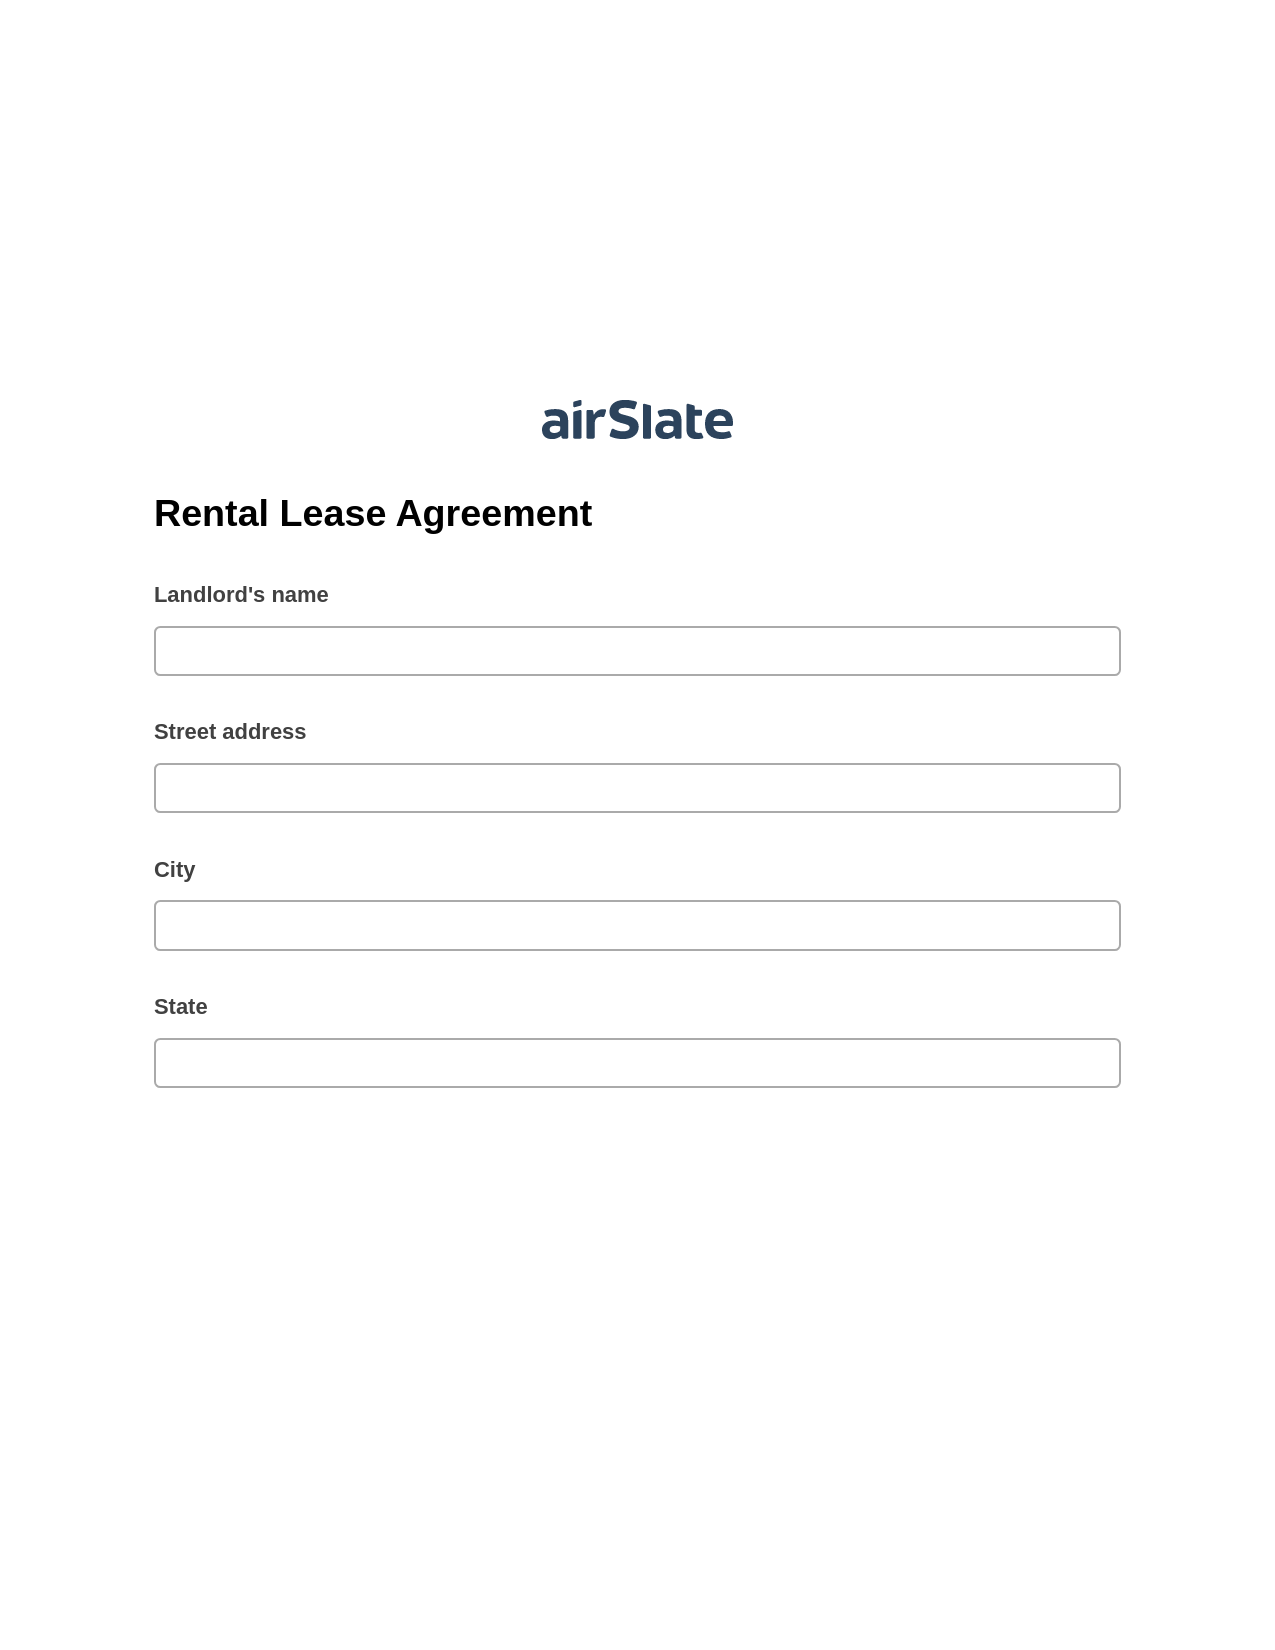 Rental Lease Agreement Pre-fill Slate from MS Dynamics 365 Records Bot, Open as Role Bot, Export to Excel 365 Bot